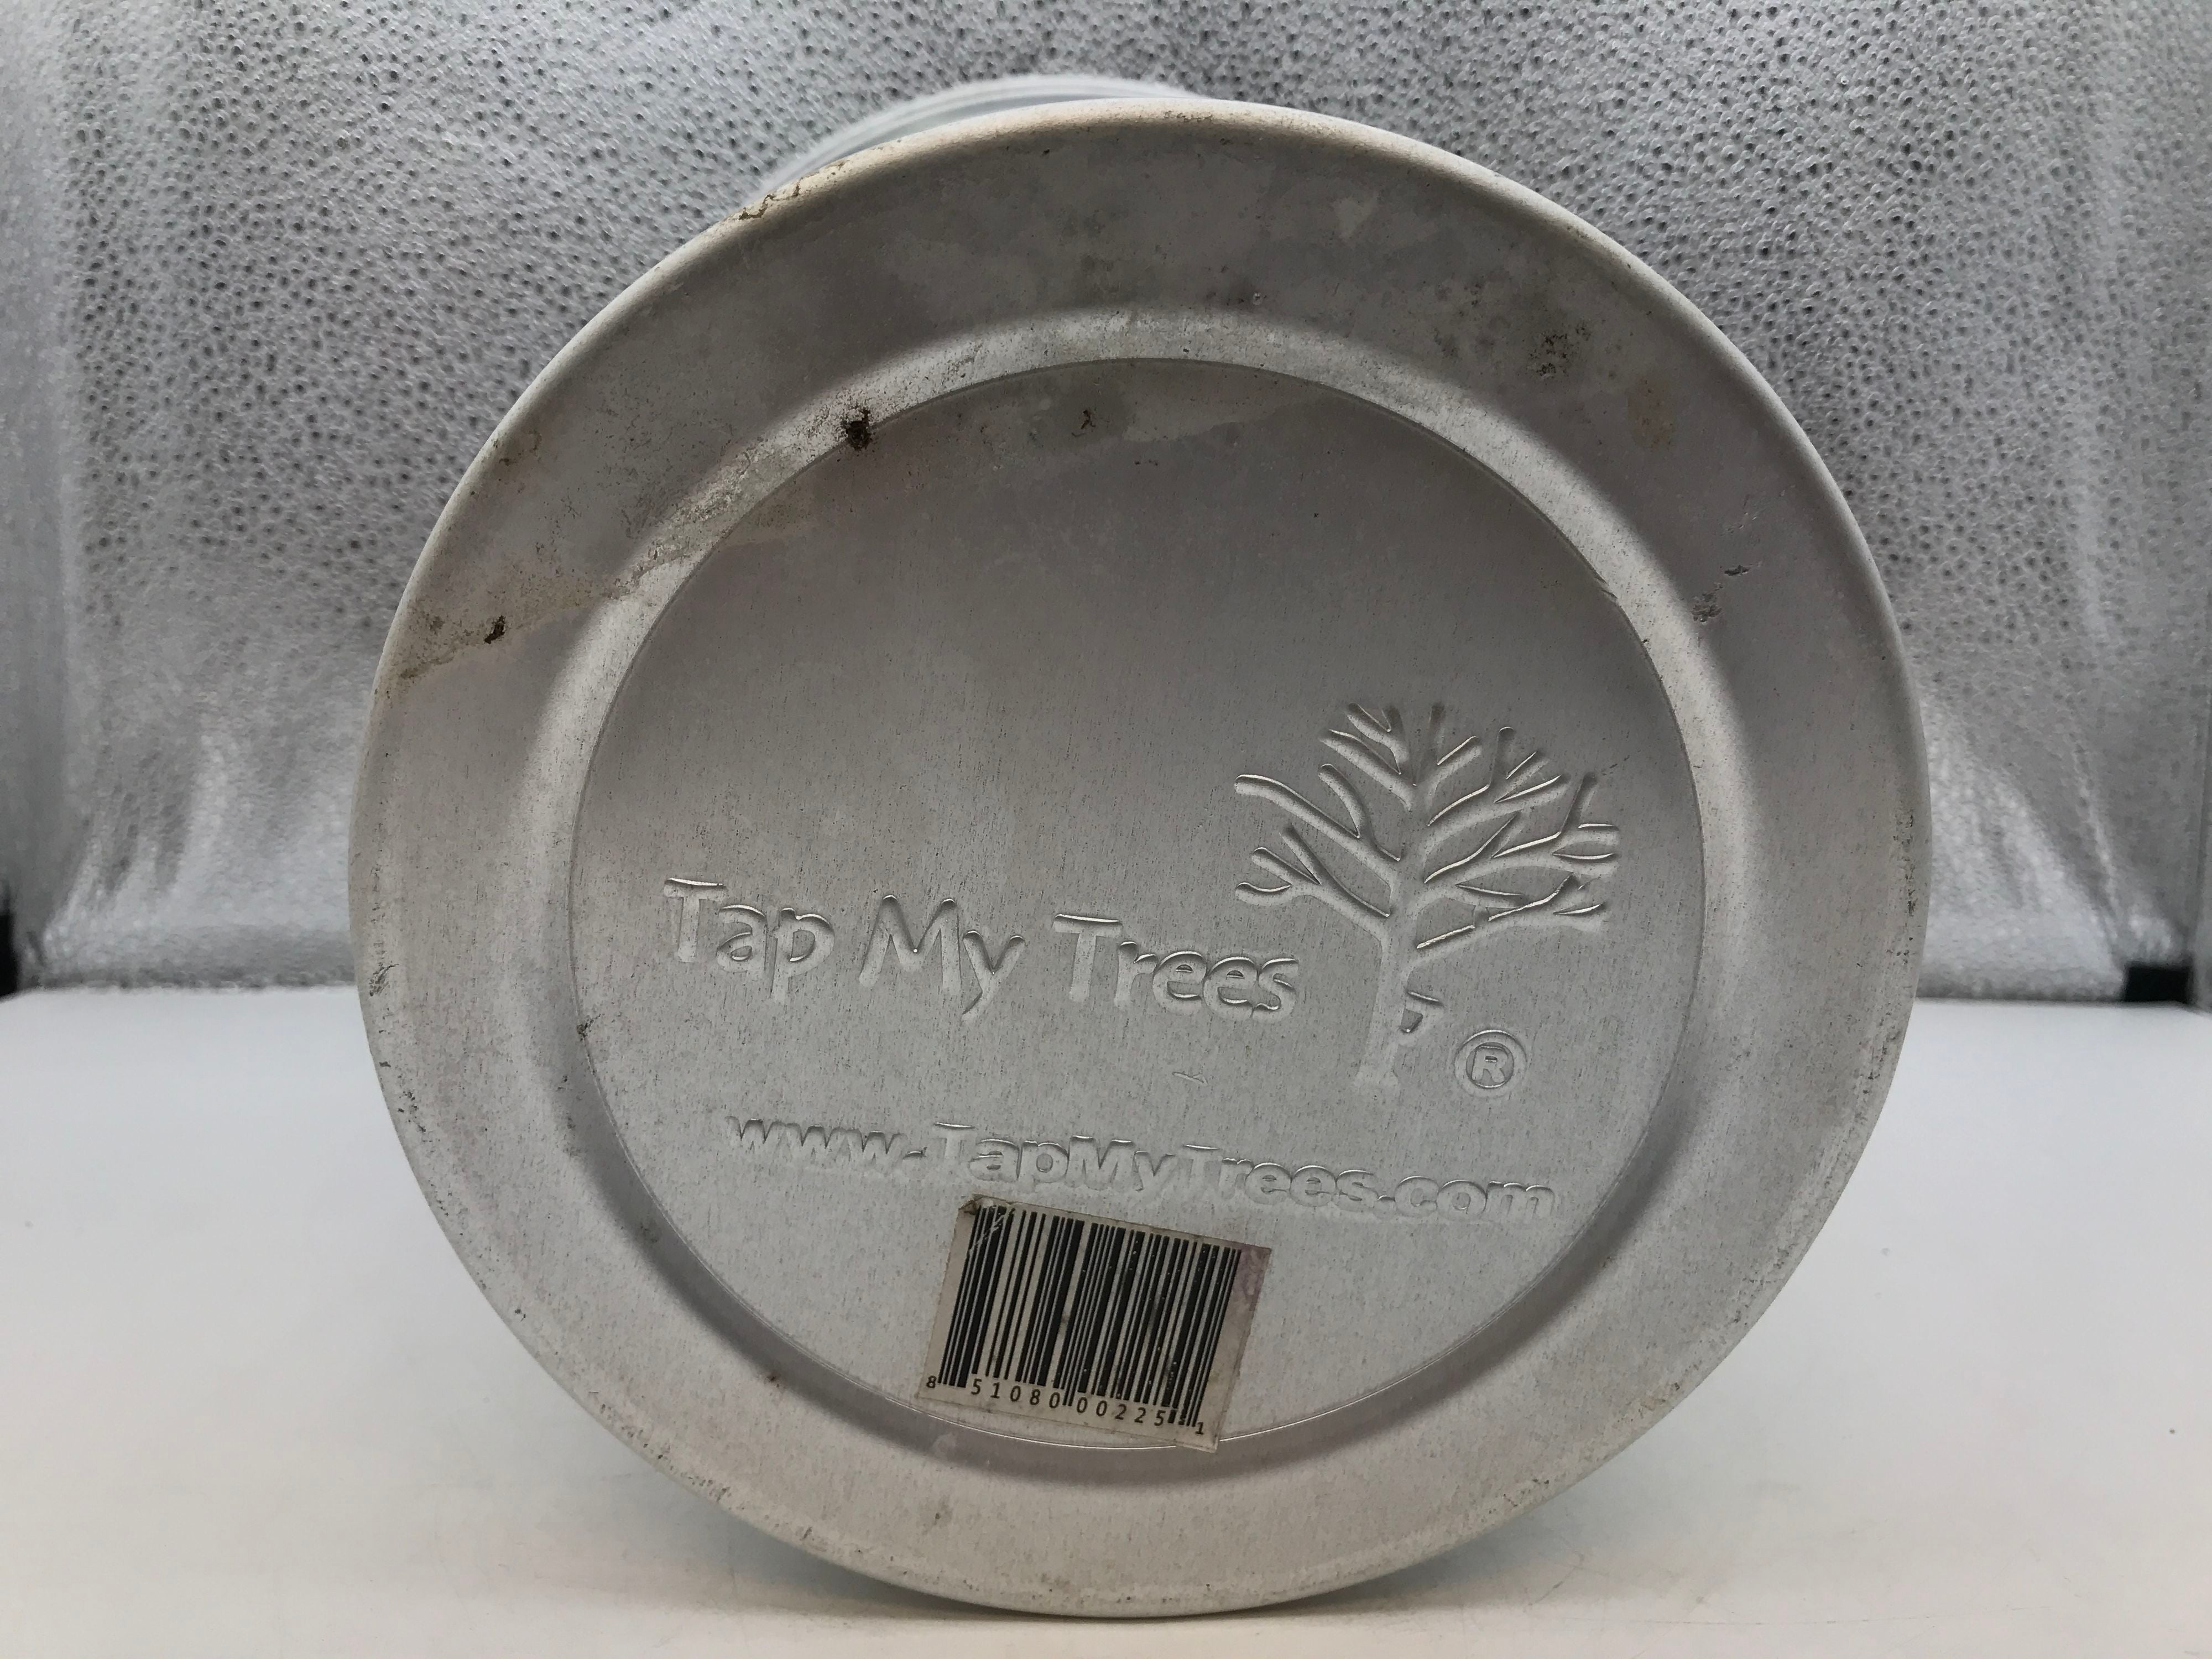 Contemporary Silver Tap My Trees Aluminum Planter 9.75"x9.75"x12.5"